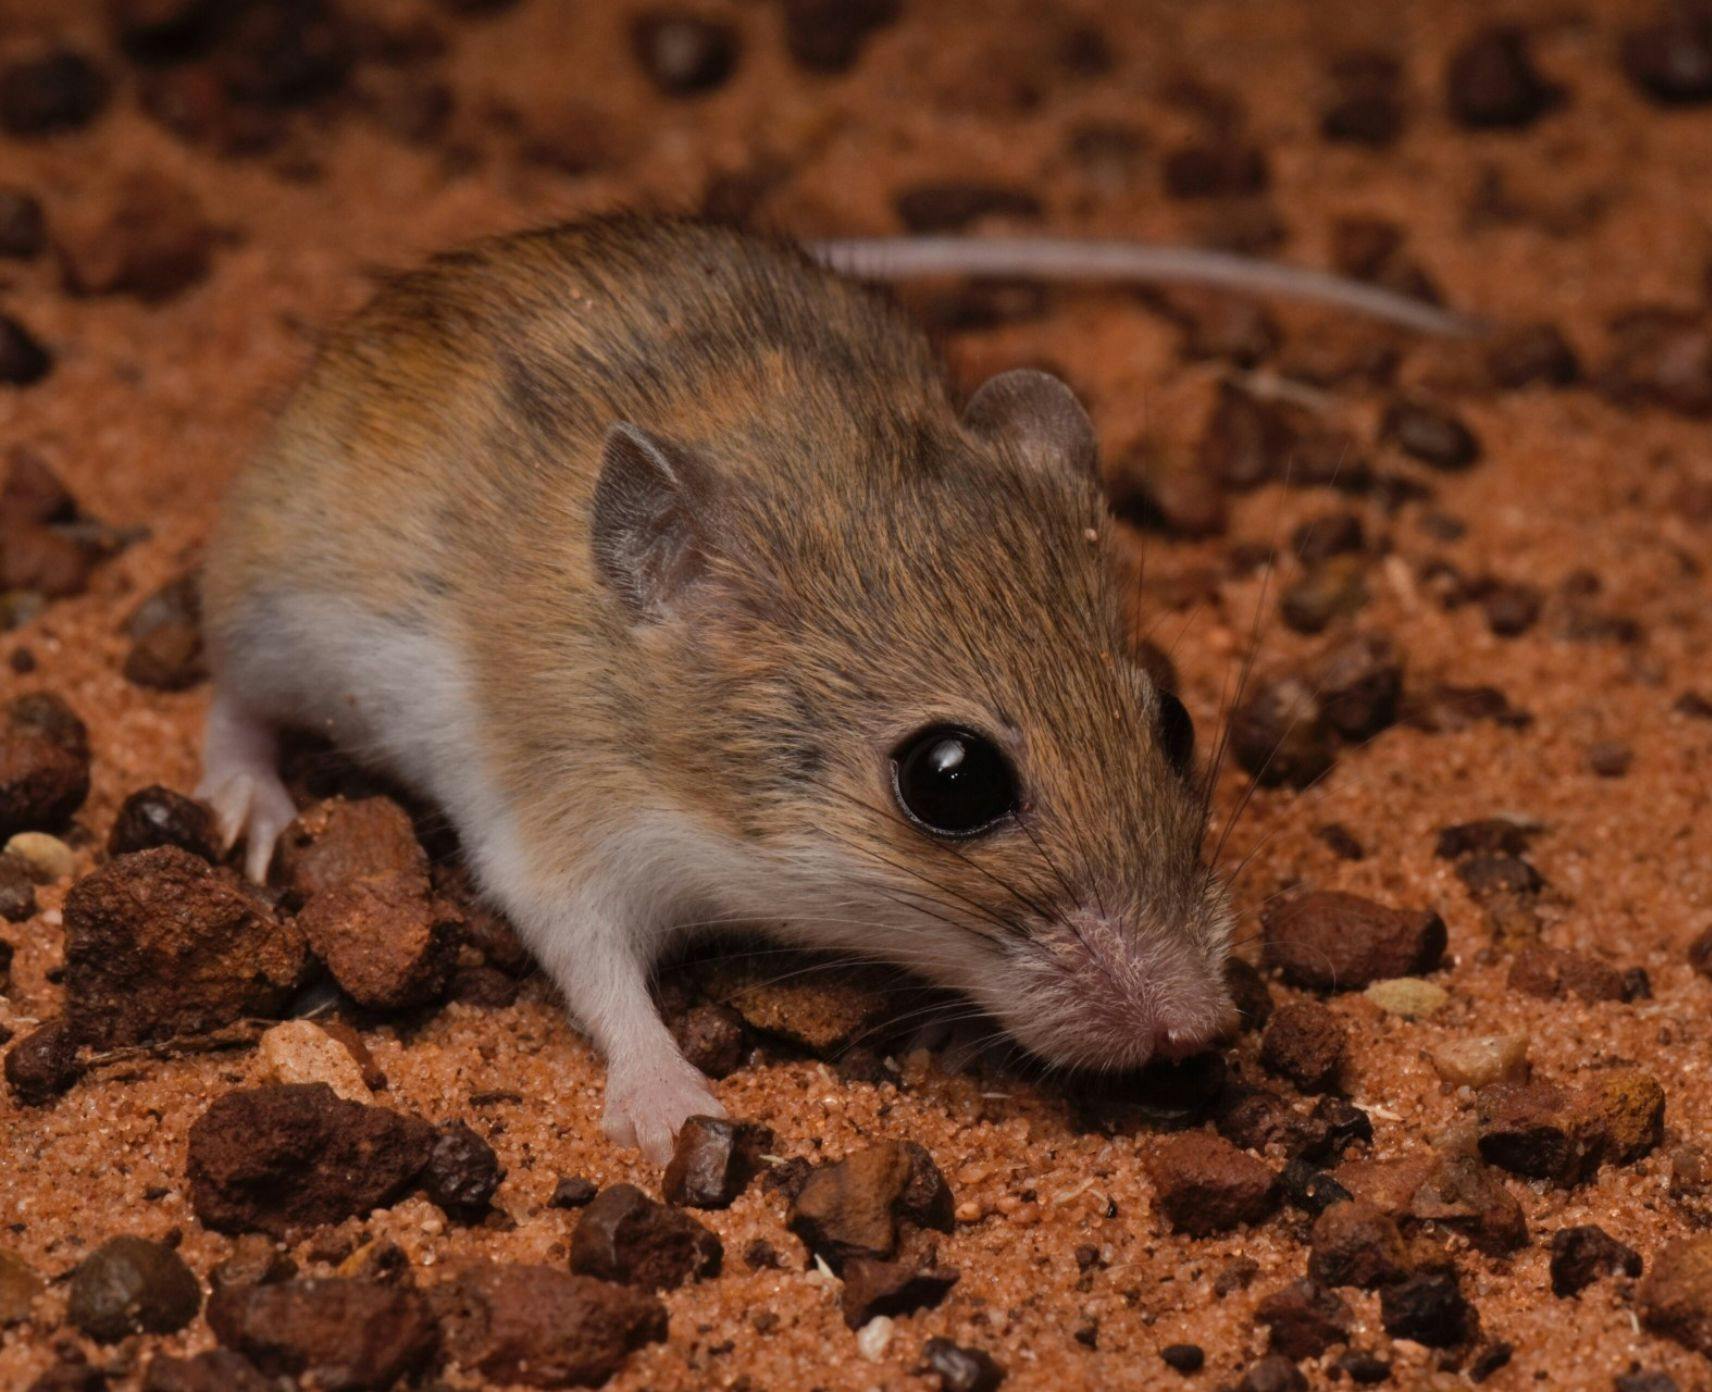 Close-up of the delicate mouse